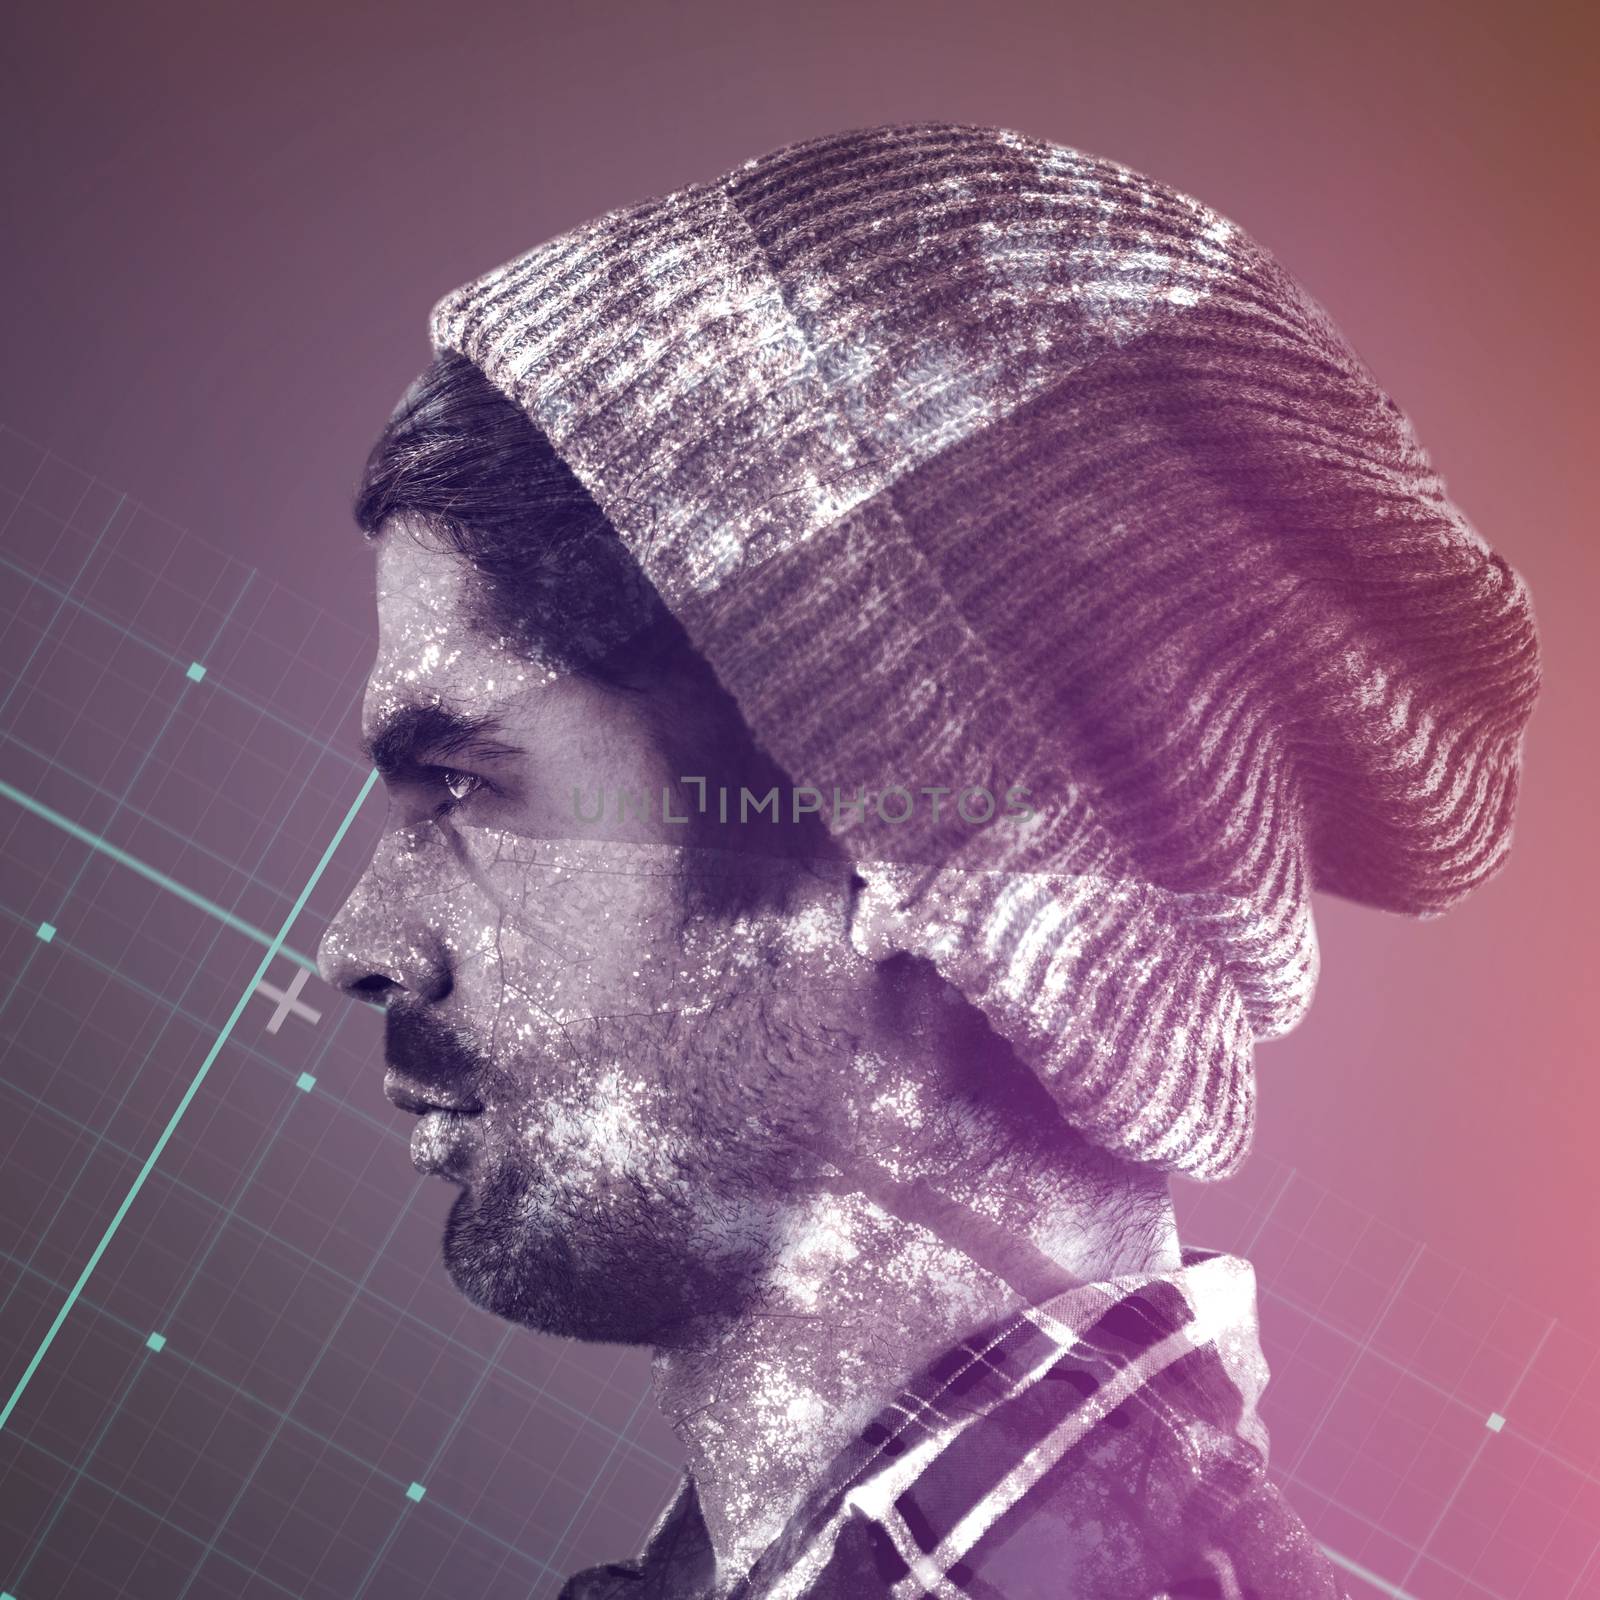 Profile view of confident hipster against grey matrix